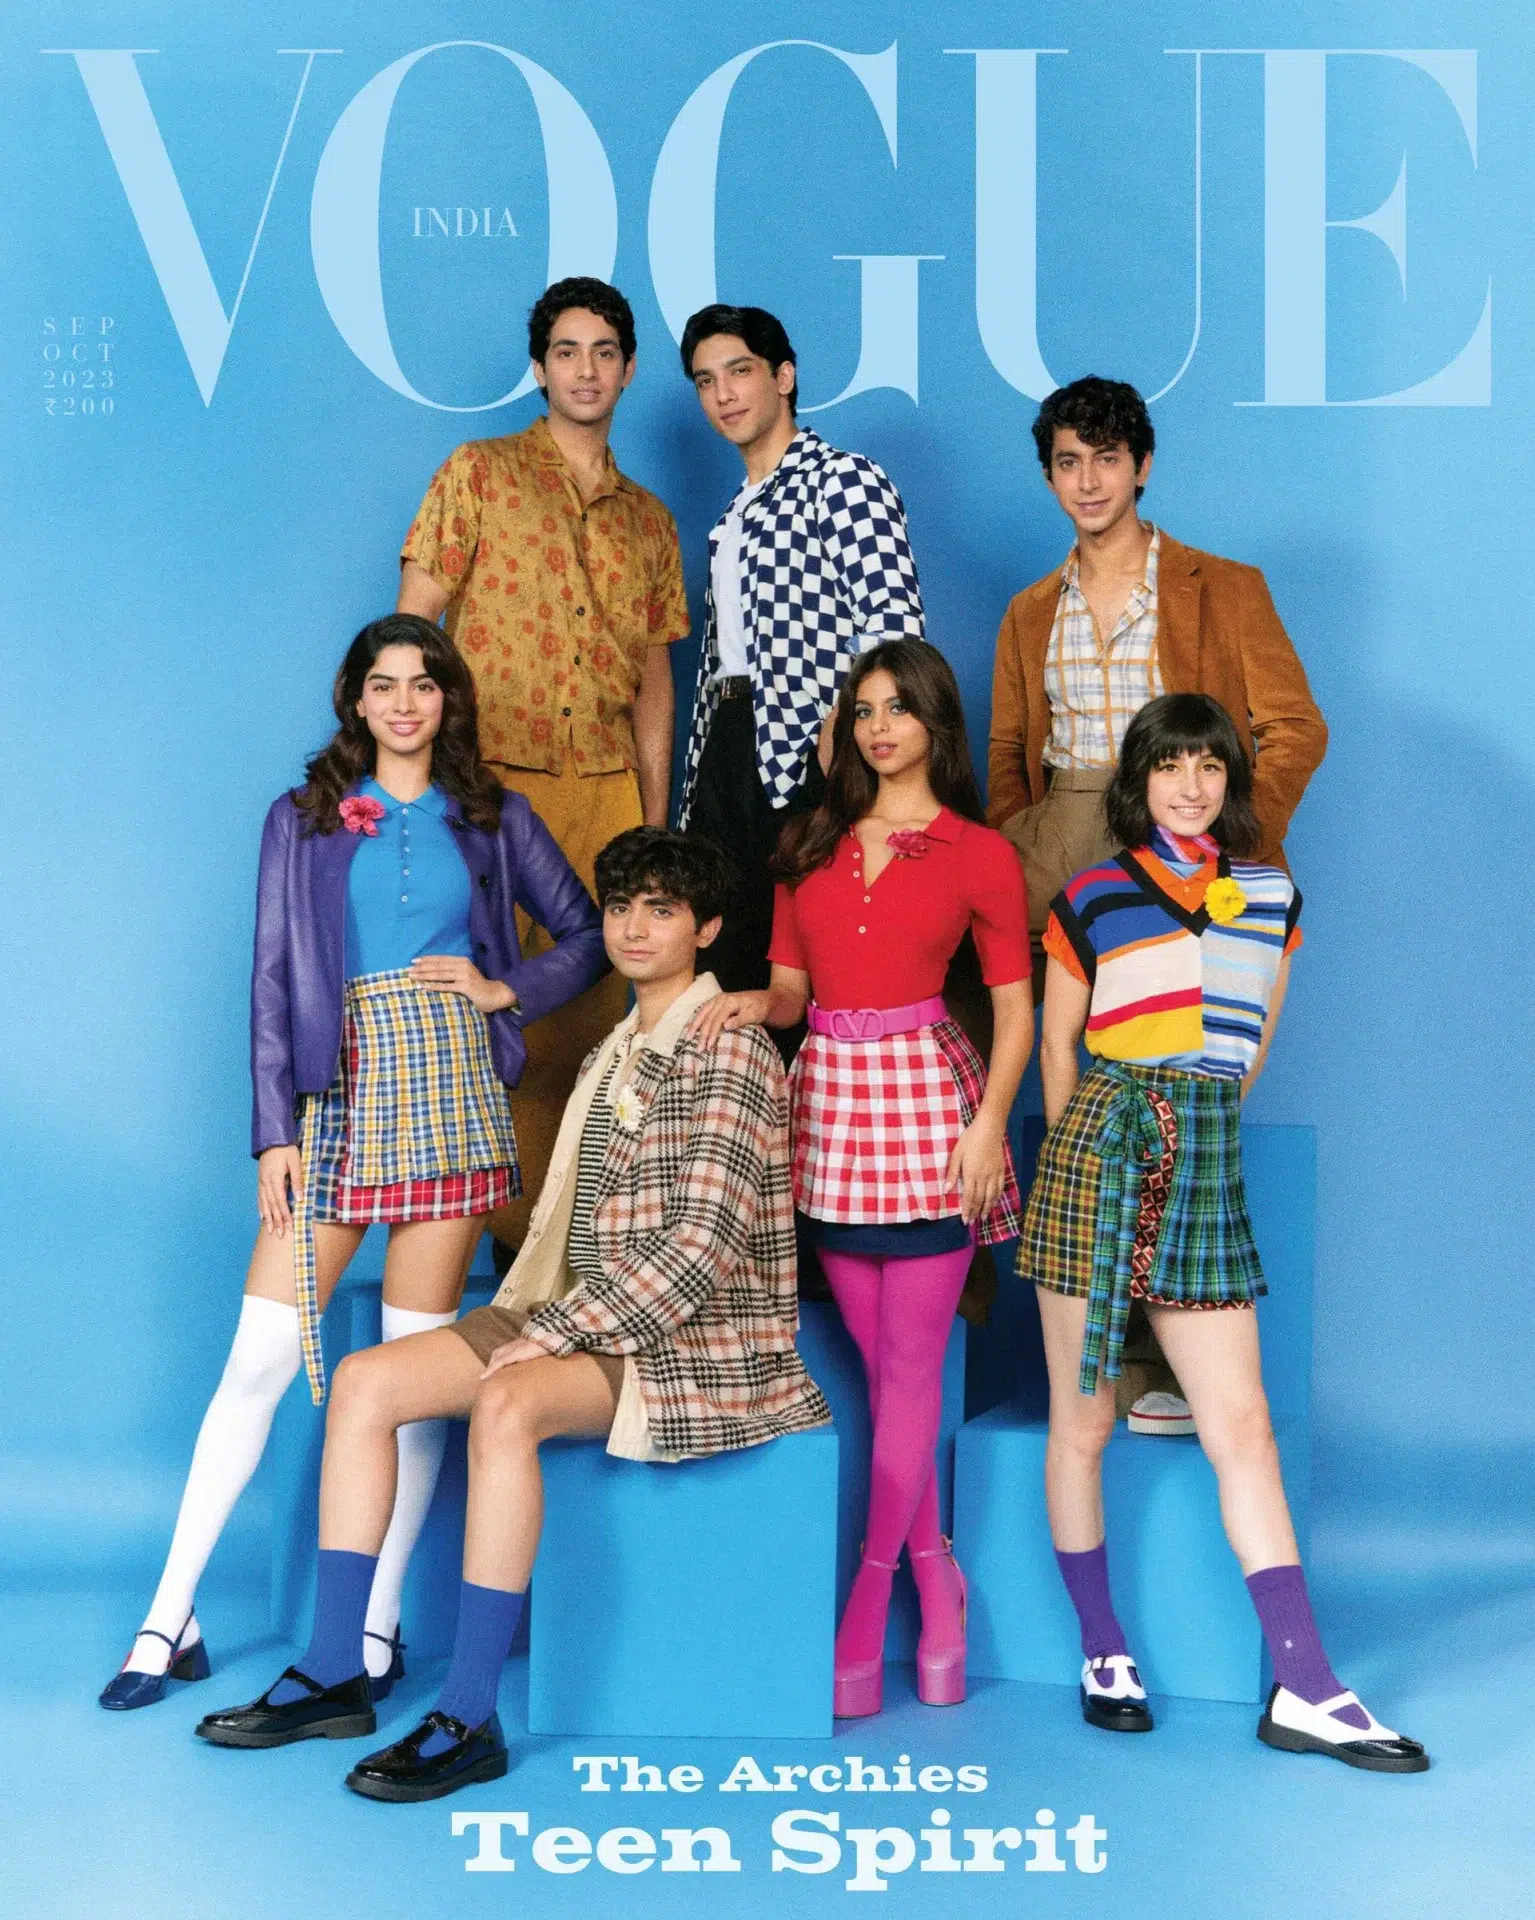 Fabulous Cast of The Archies for Vogue India